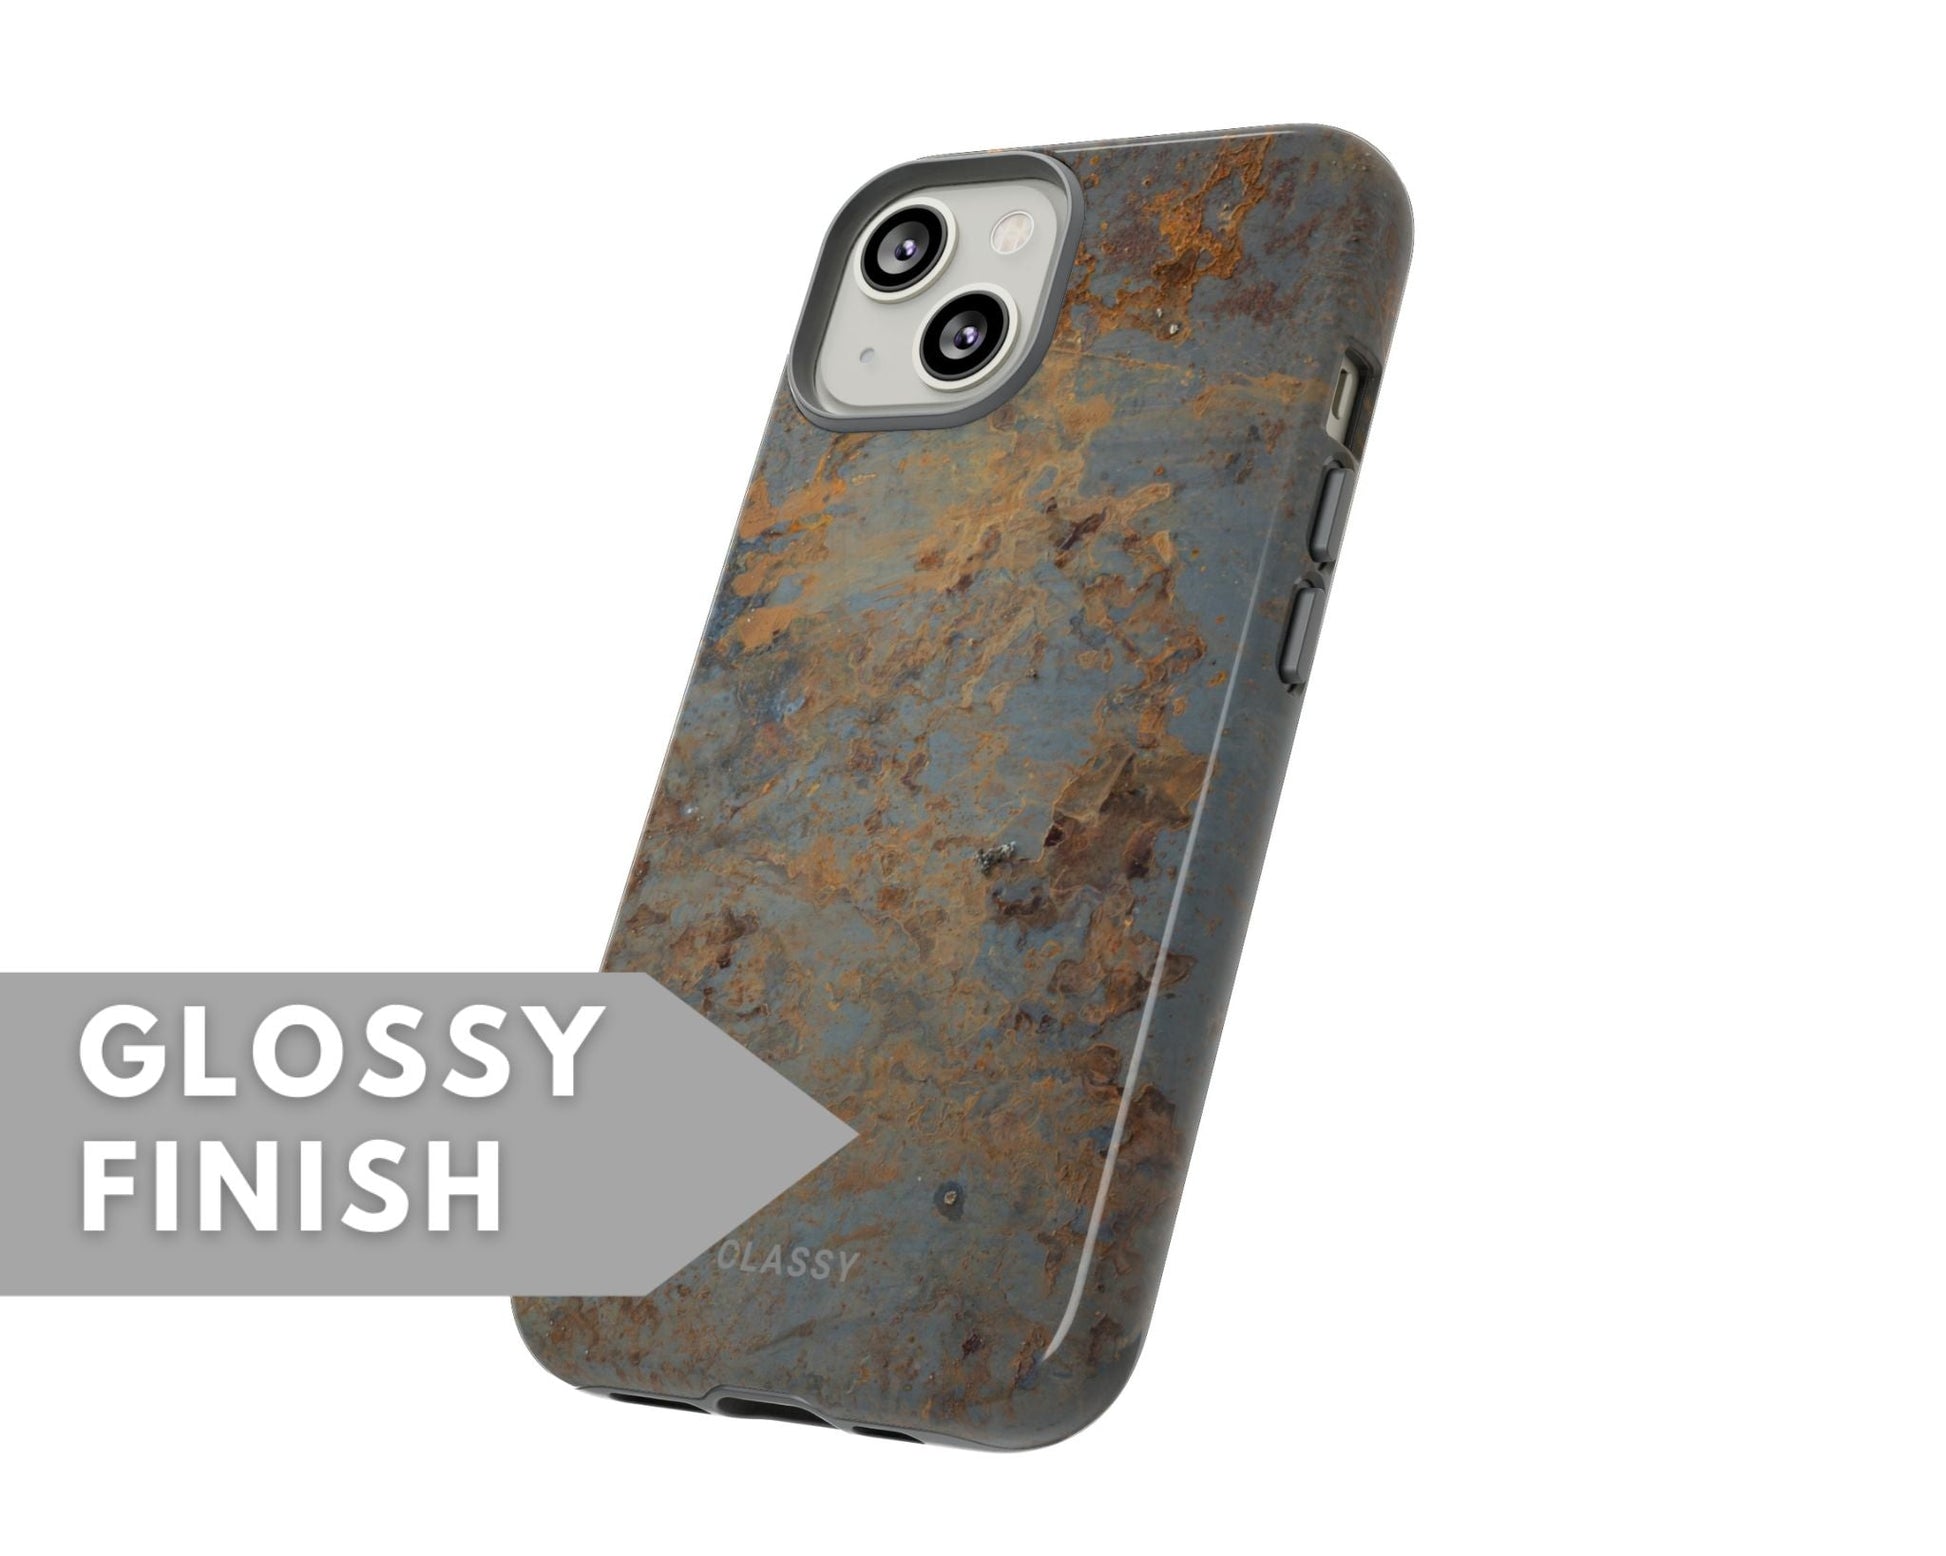 Gray and Gold Tough Case - Classy Cases